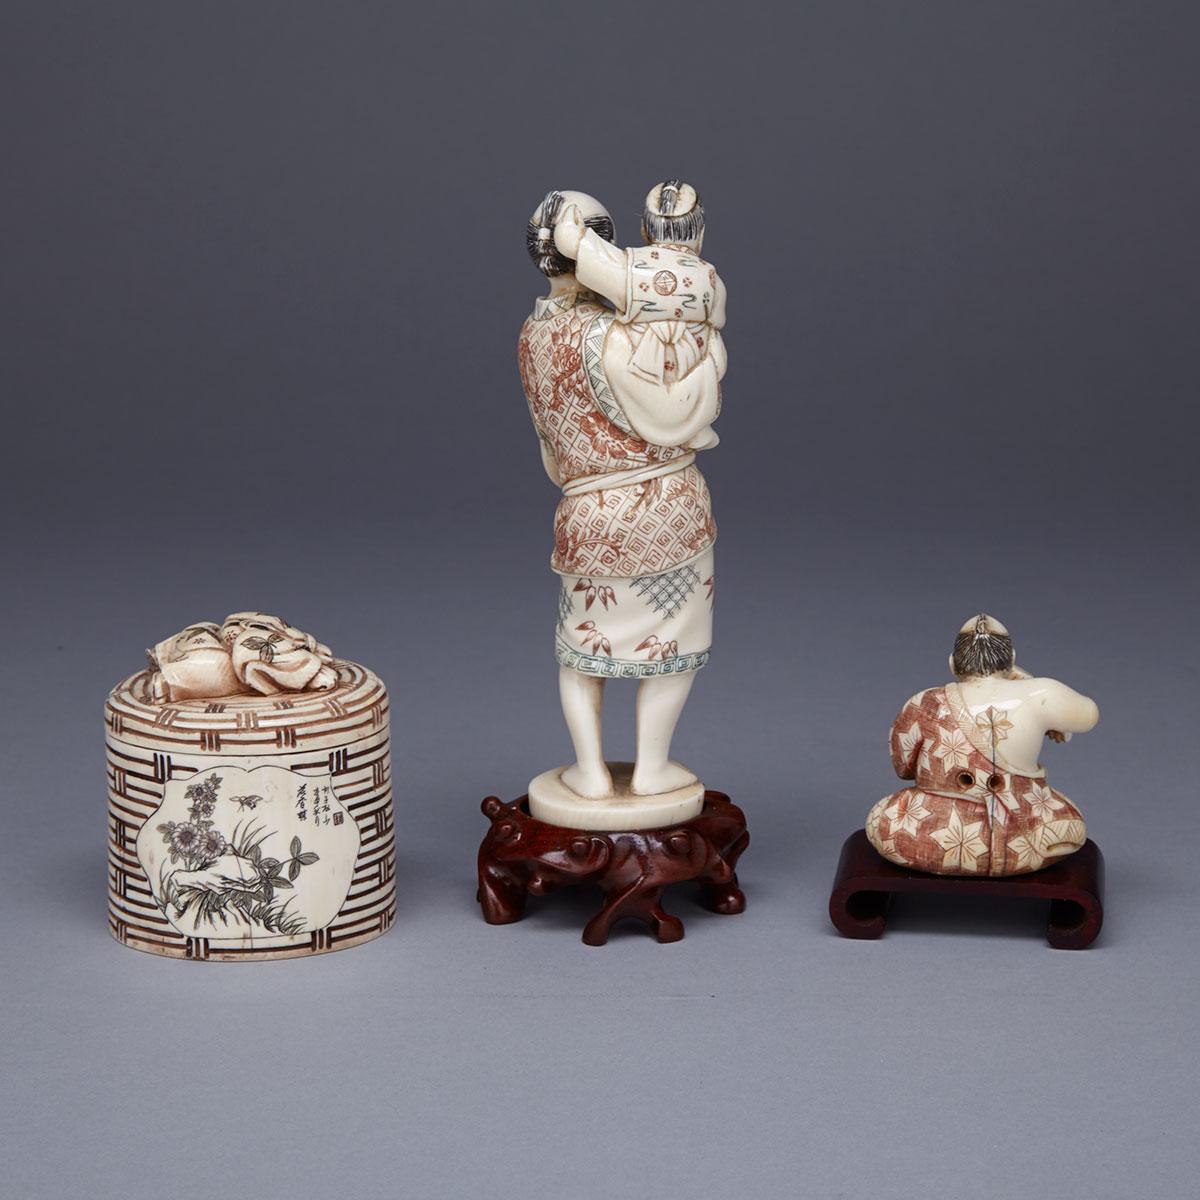 Three Tinted Ivory Carved Figures, Mid-20th Century